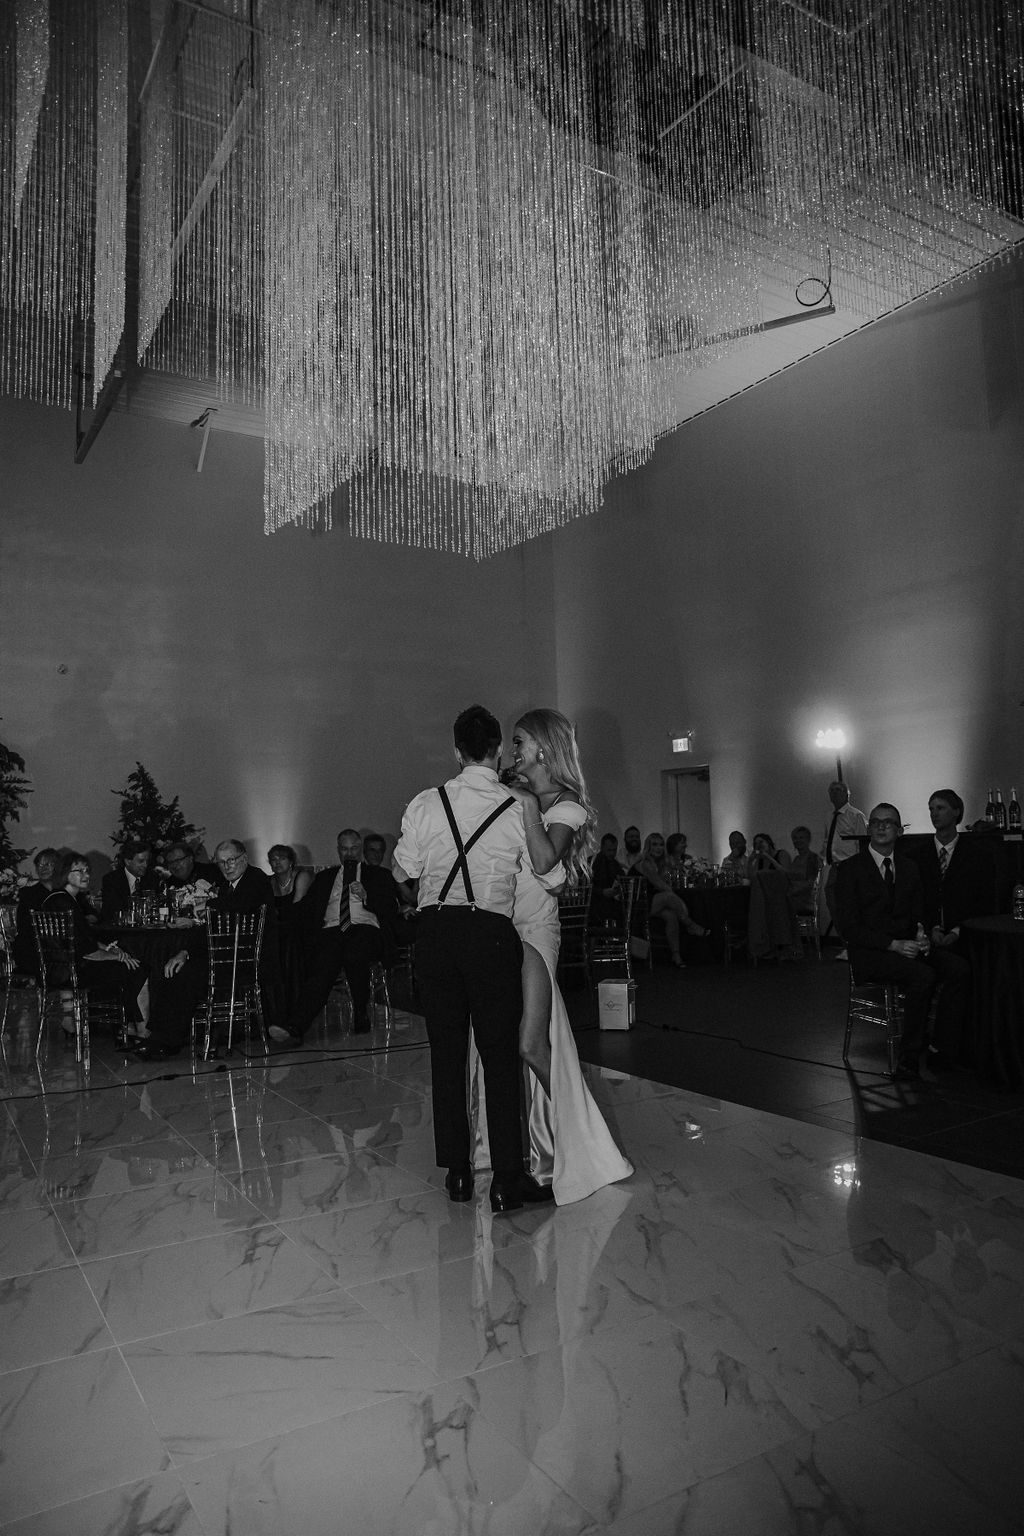 Bride and groom sharing their first dance on a glossy, marble dance floor in front of seated guests at their Red Deer wedding, glam wedding inspiration, bride wearing modern gown with slit. 